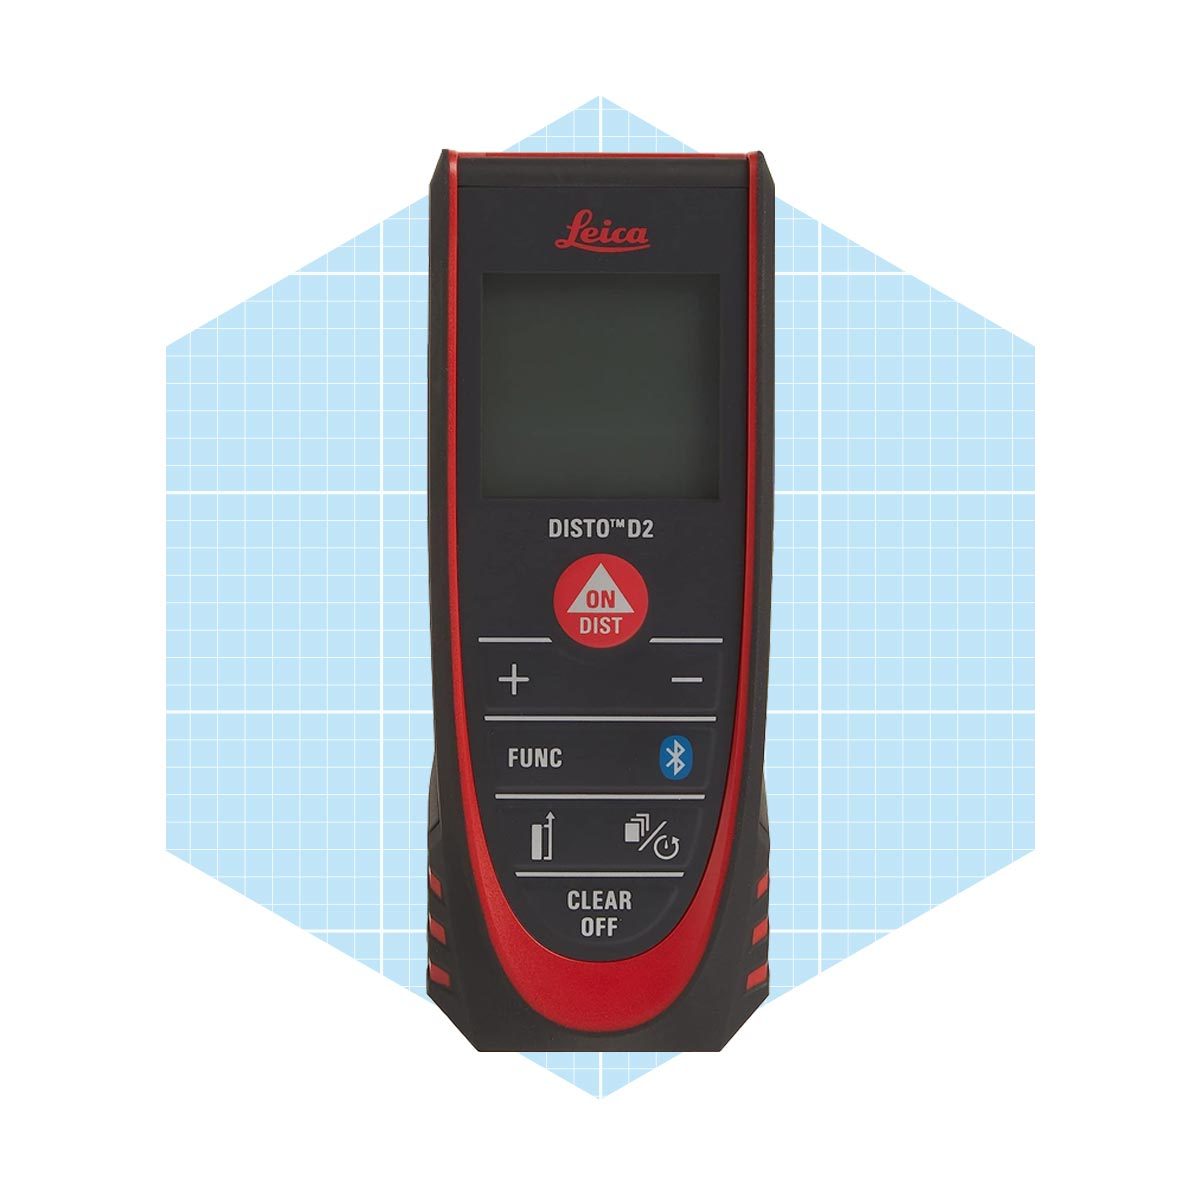 How to Choose the Best Digital Laser Tape Measure Brand